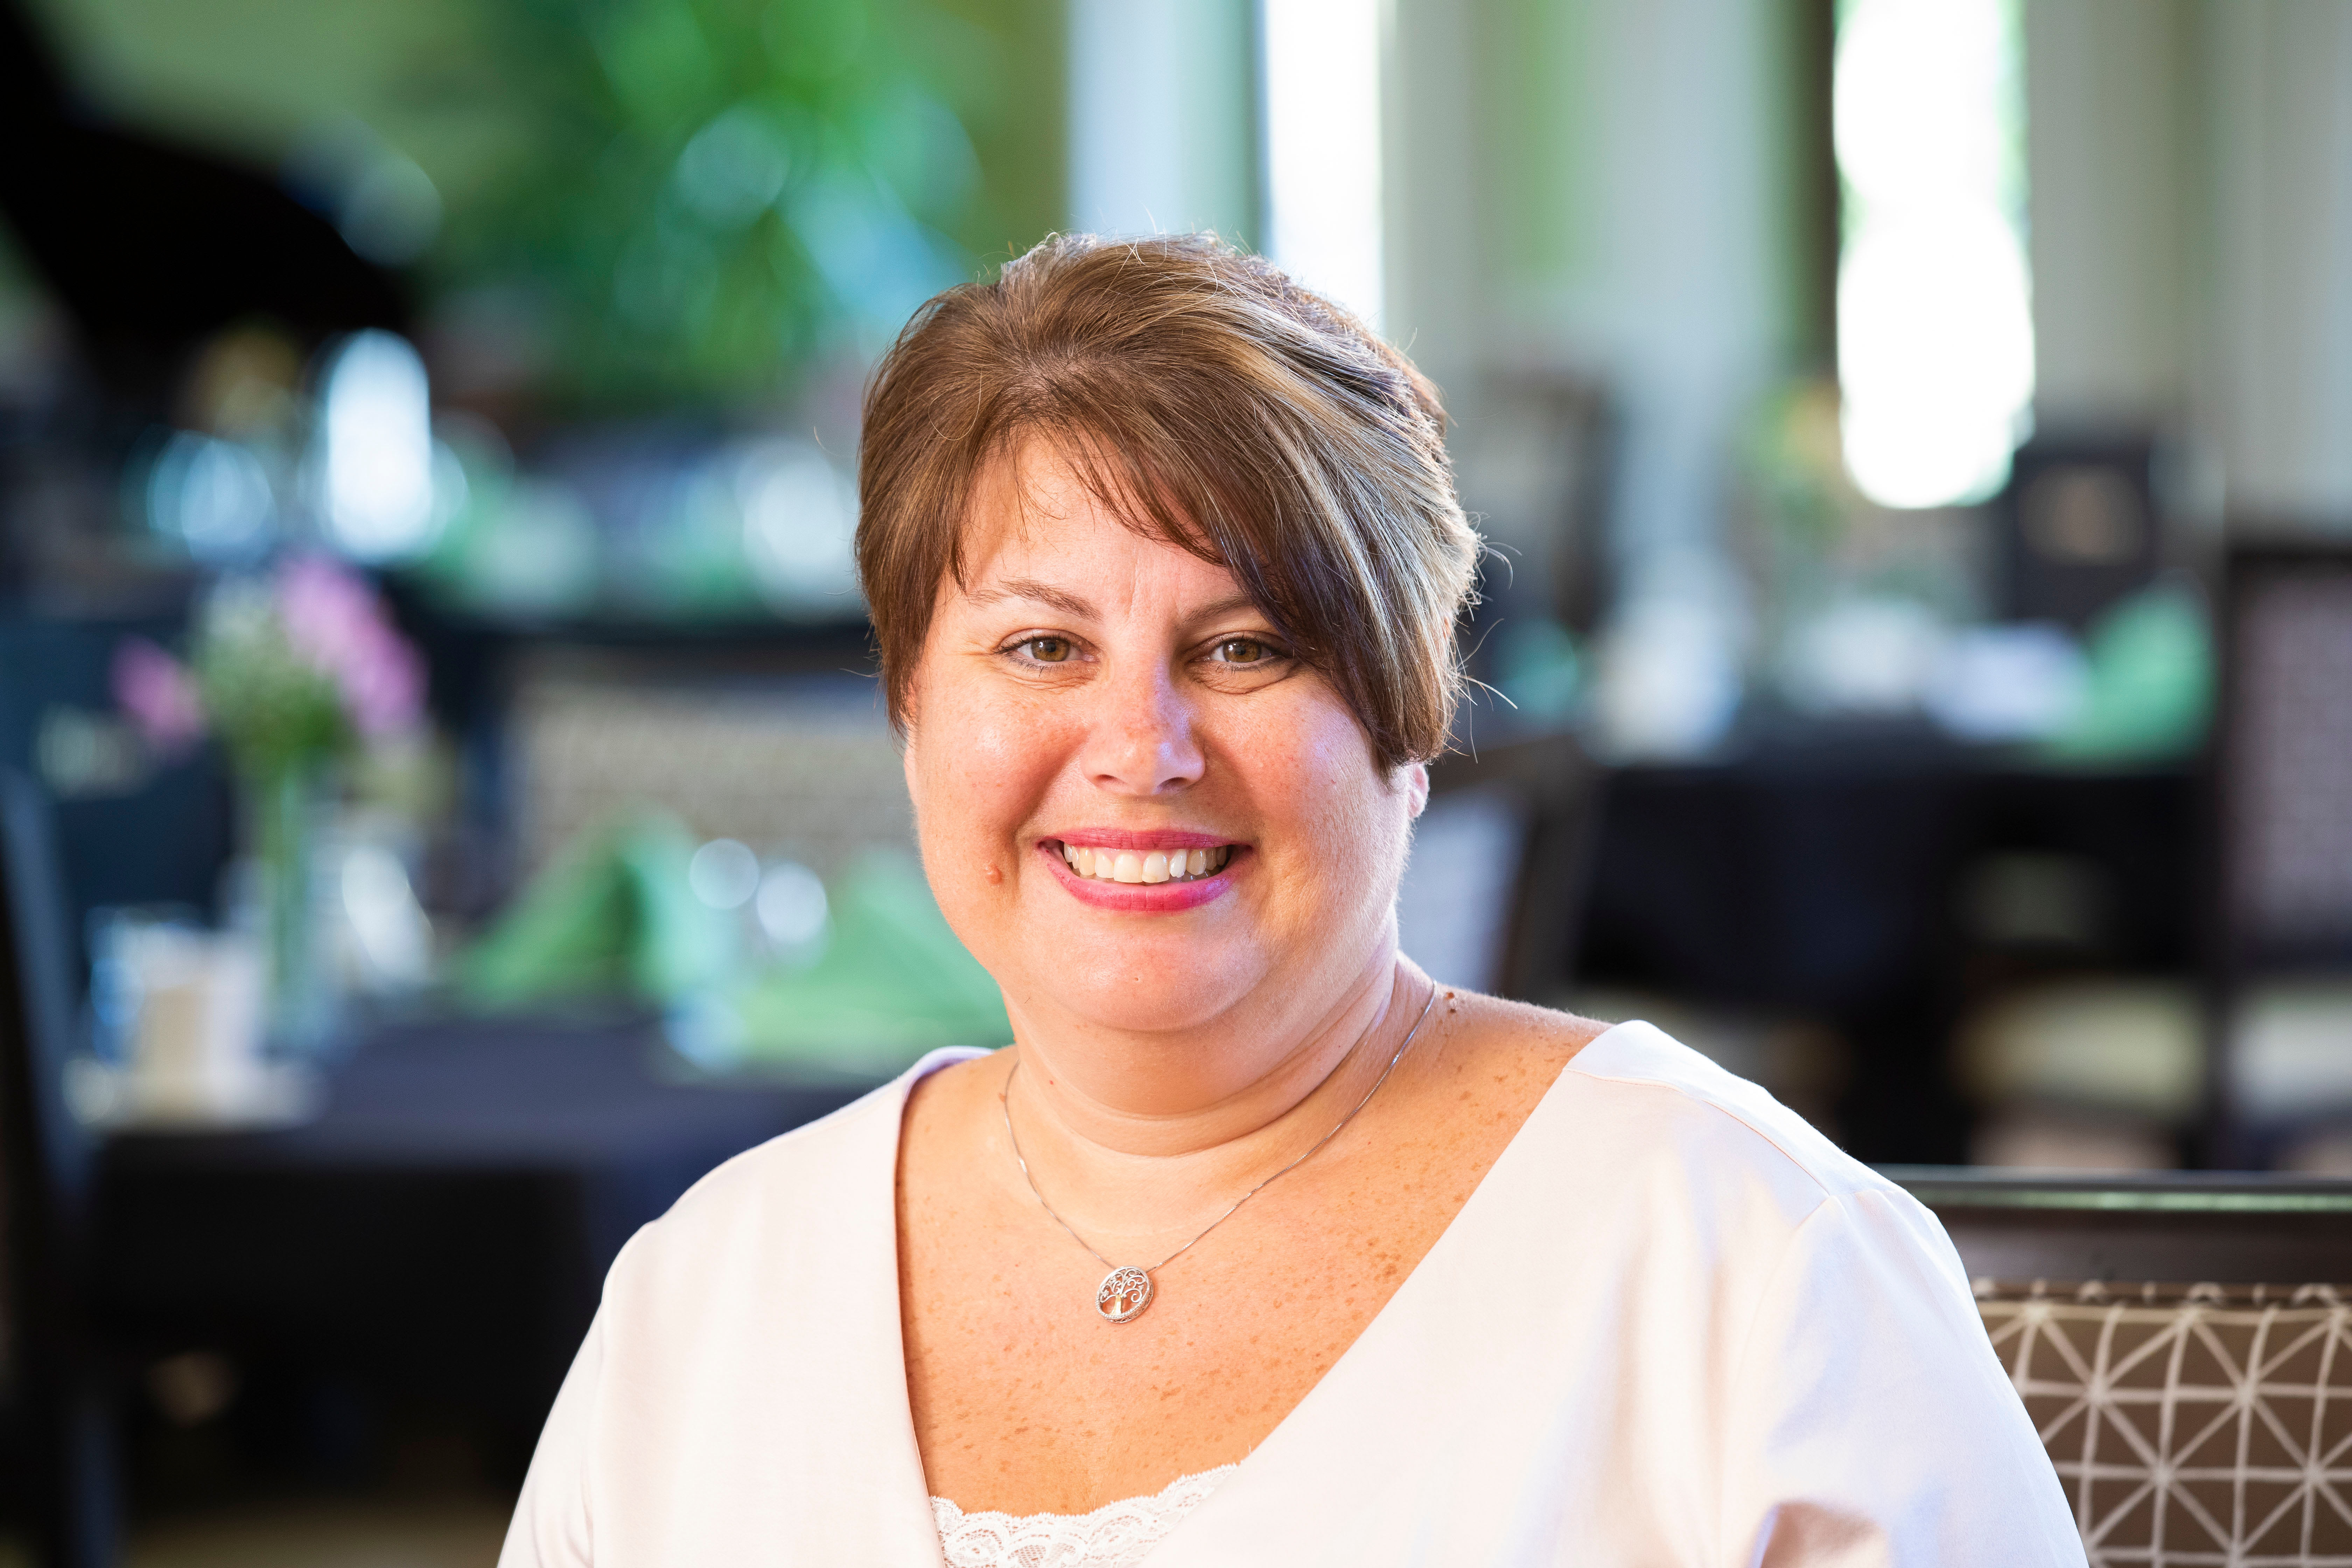 Director of Assisted Living - Michelle Borelli at Cypress Point in Fort Myers, Florida